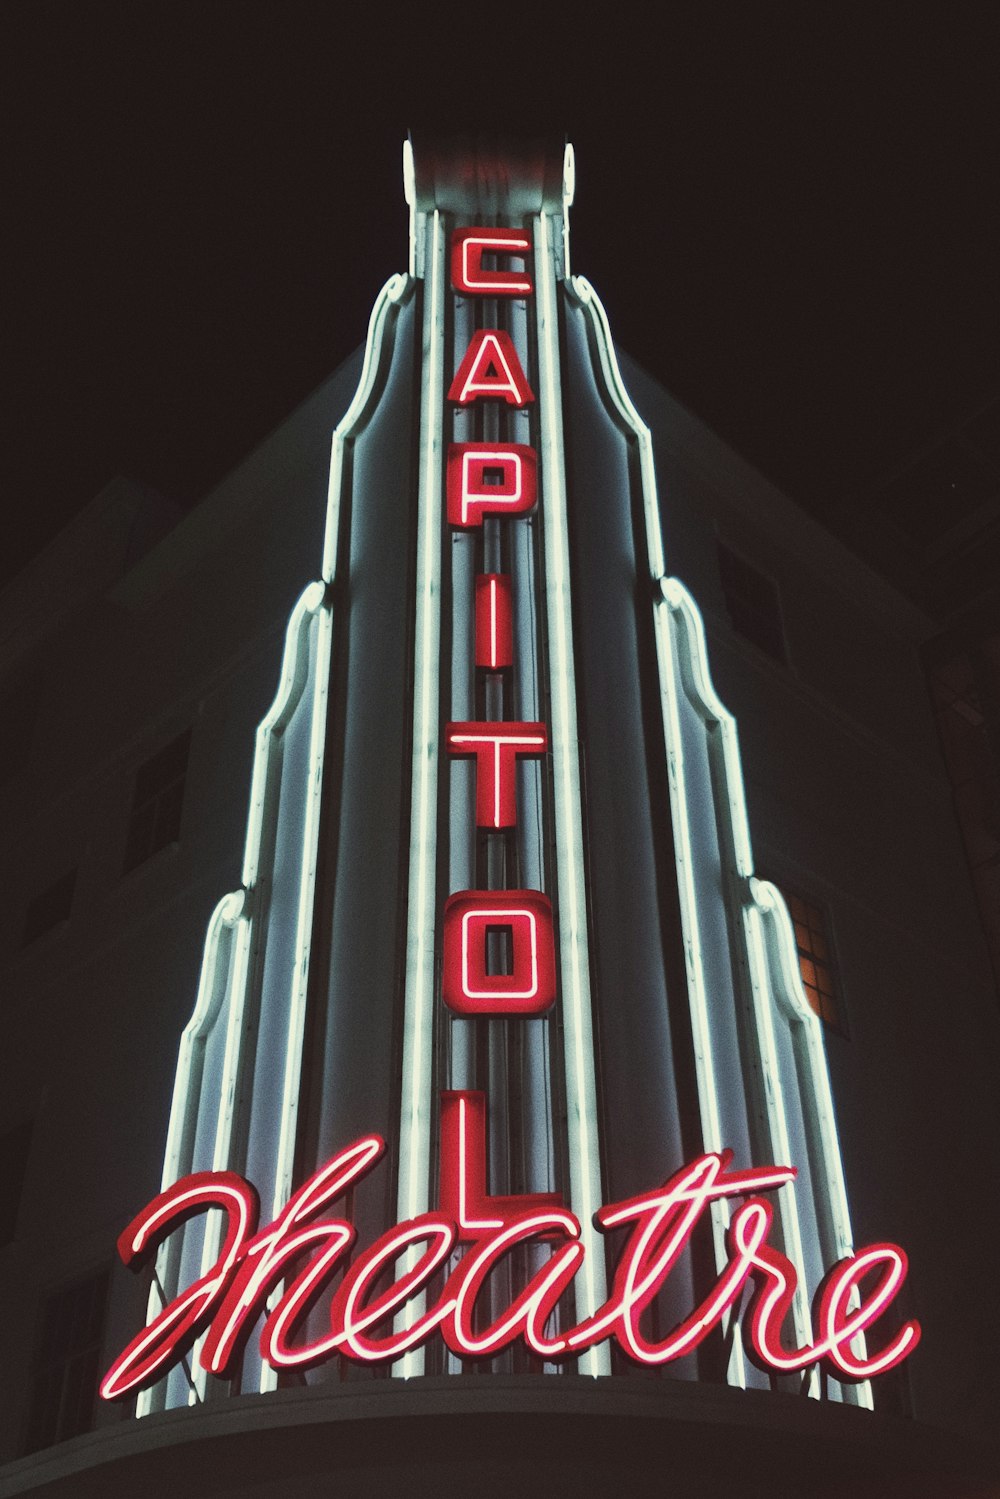 the capitol theatre sign lit up at night